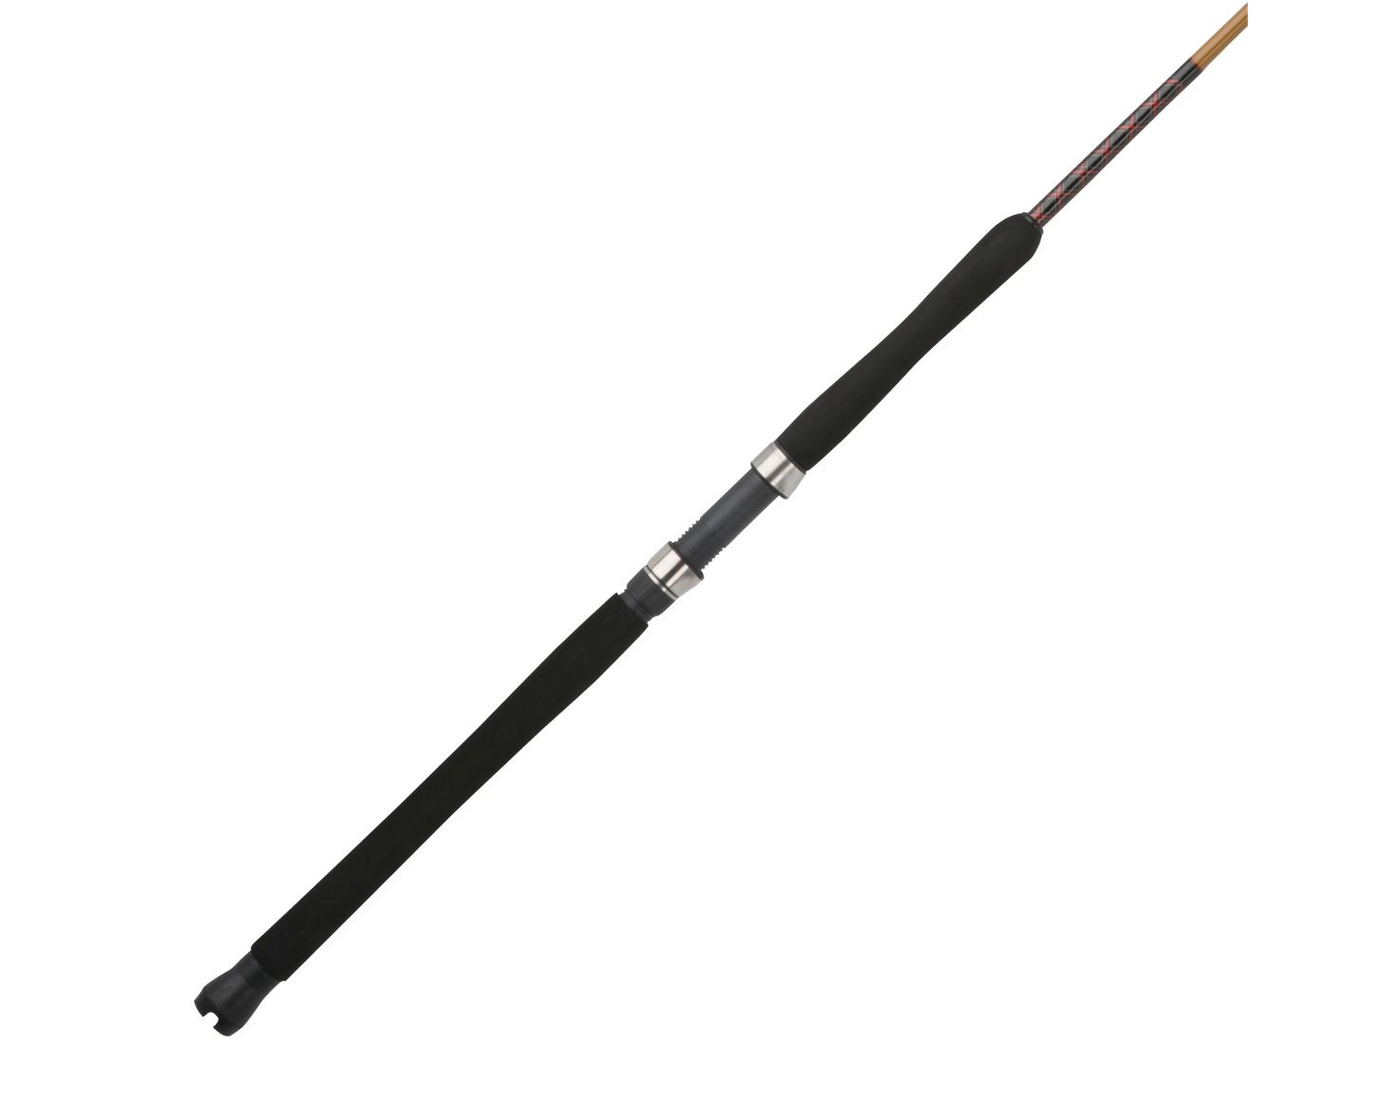 Fishing Shakespeare Ugly Stik Tiger Spinning Rod at best price in